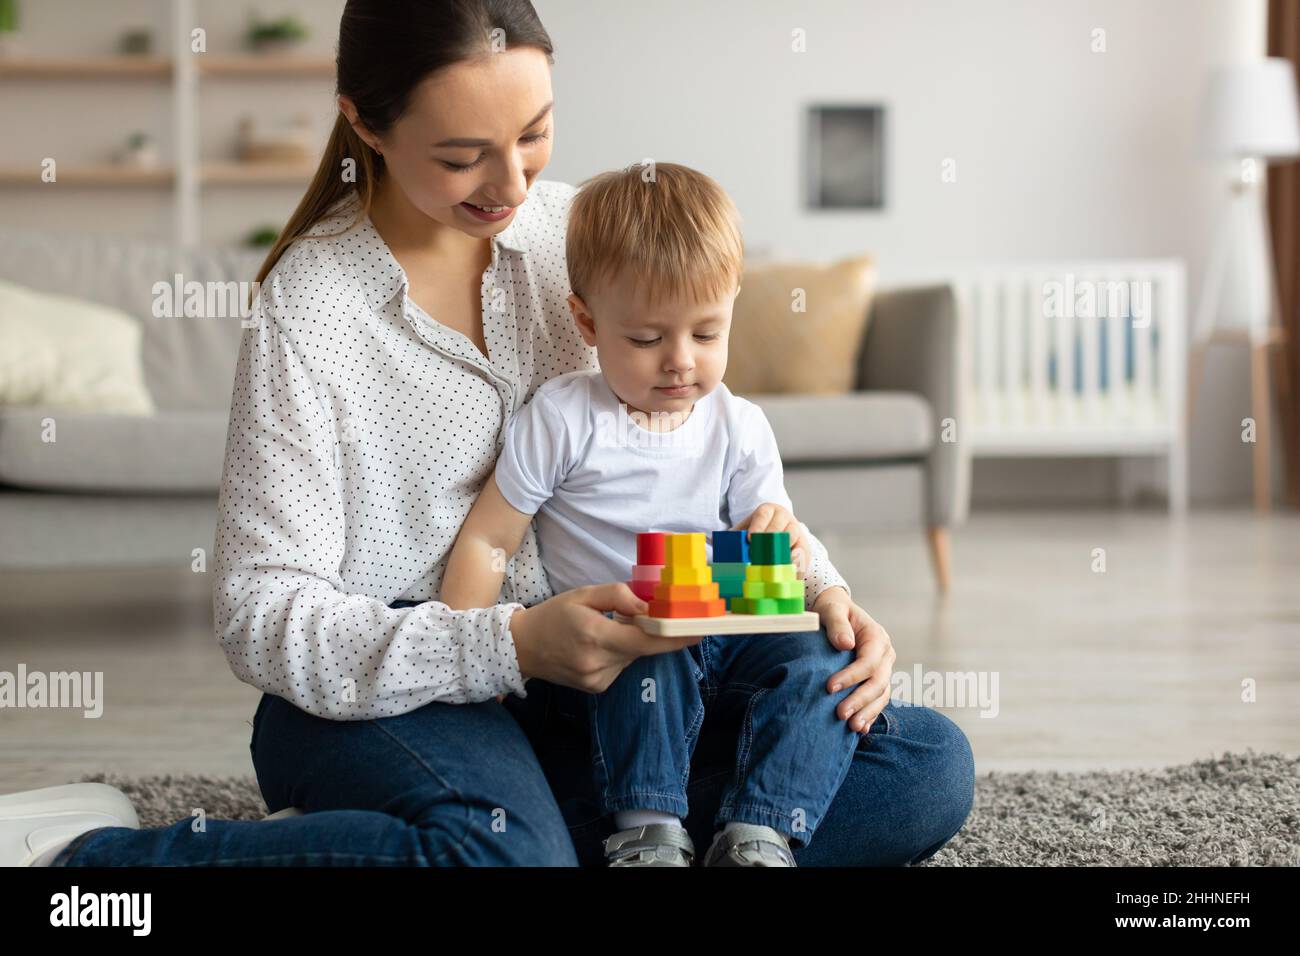 Young mom and her toddler son playing with educational toys, boy engaged in interesting development game Stock Photo